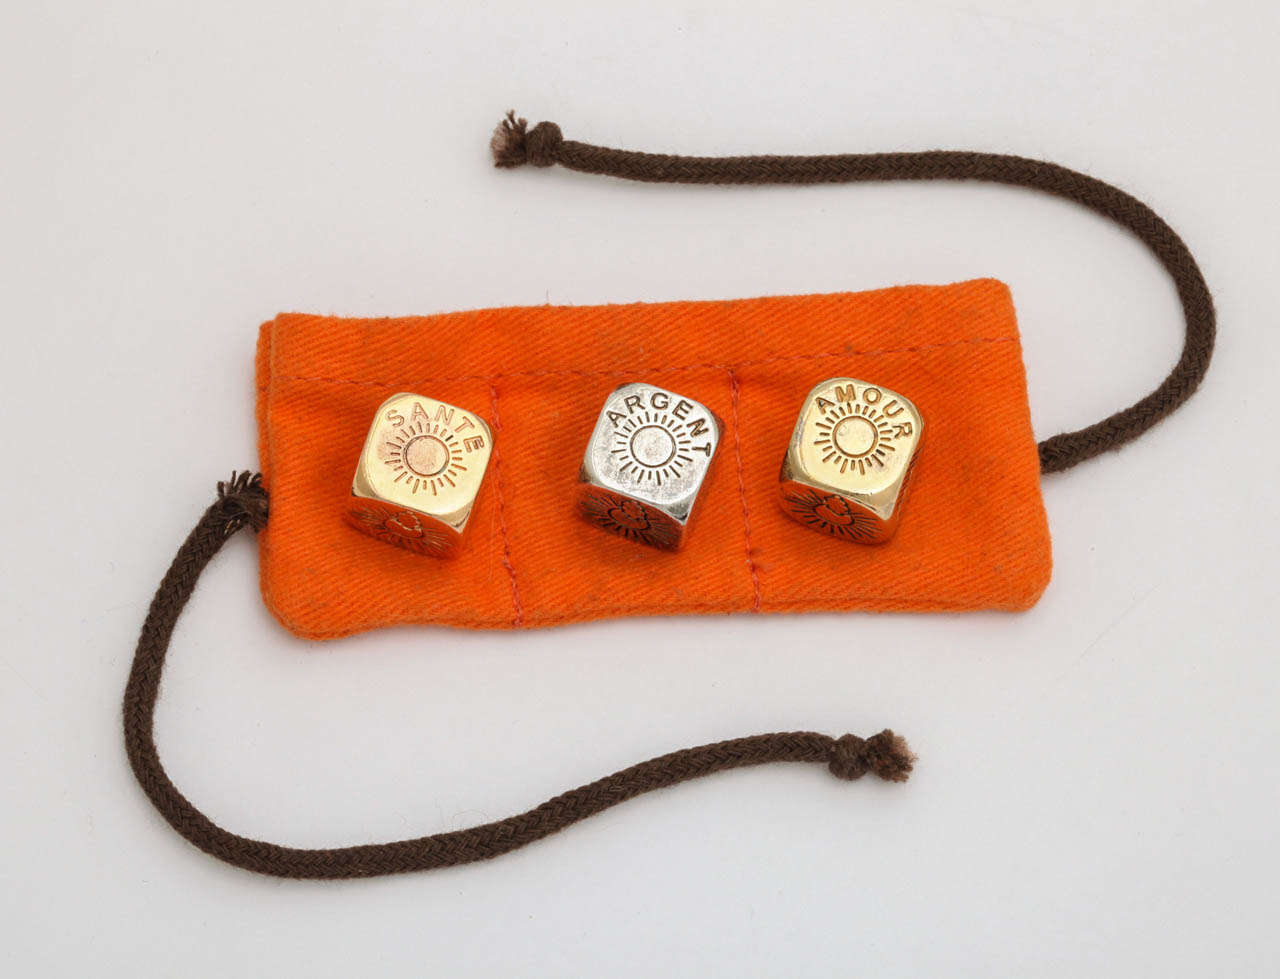 A entertaining set of weather dice showing the results of money health and love. With orange Hermes felt holding pouch in plated gold and silver